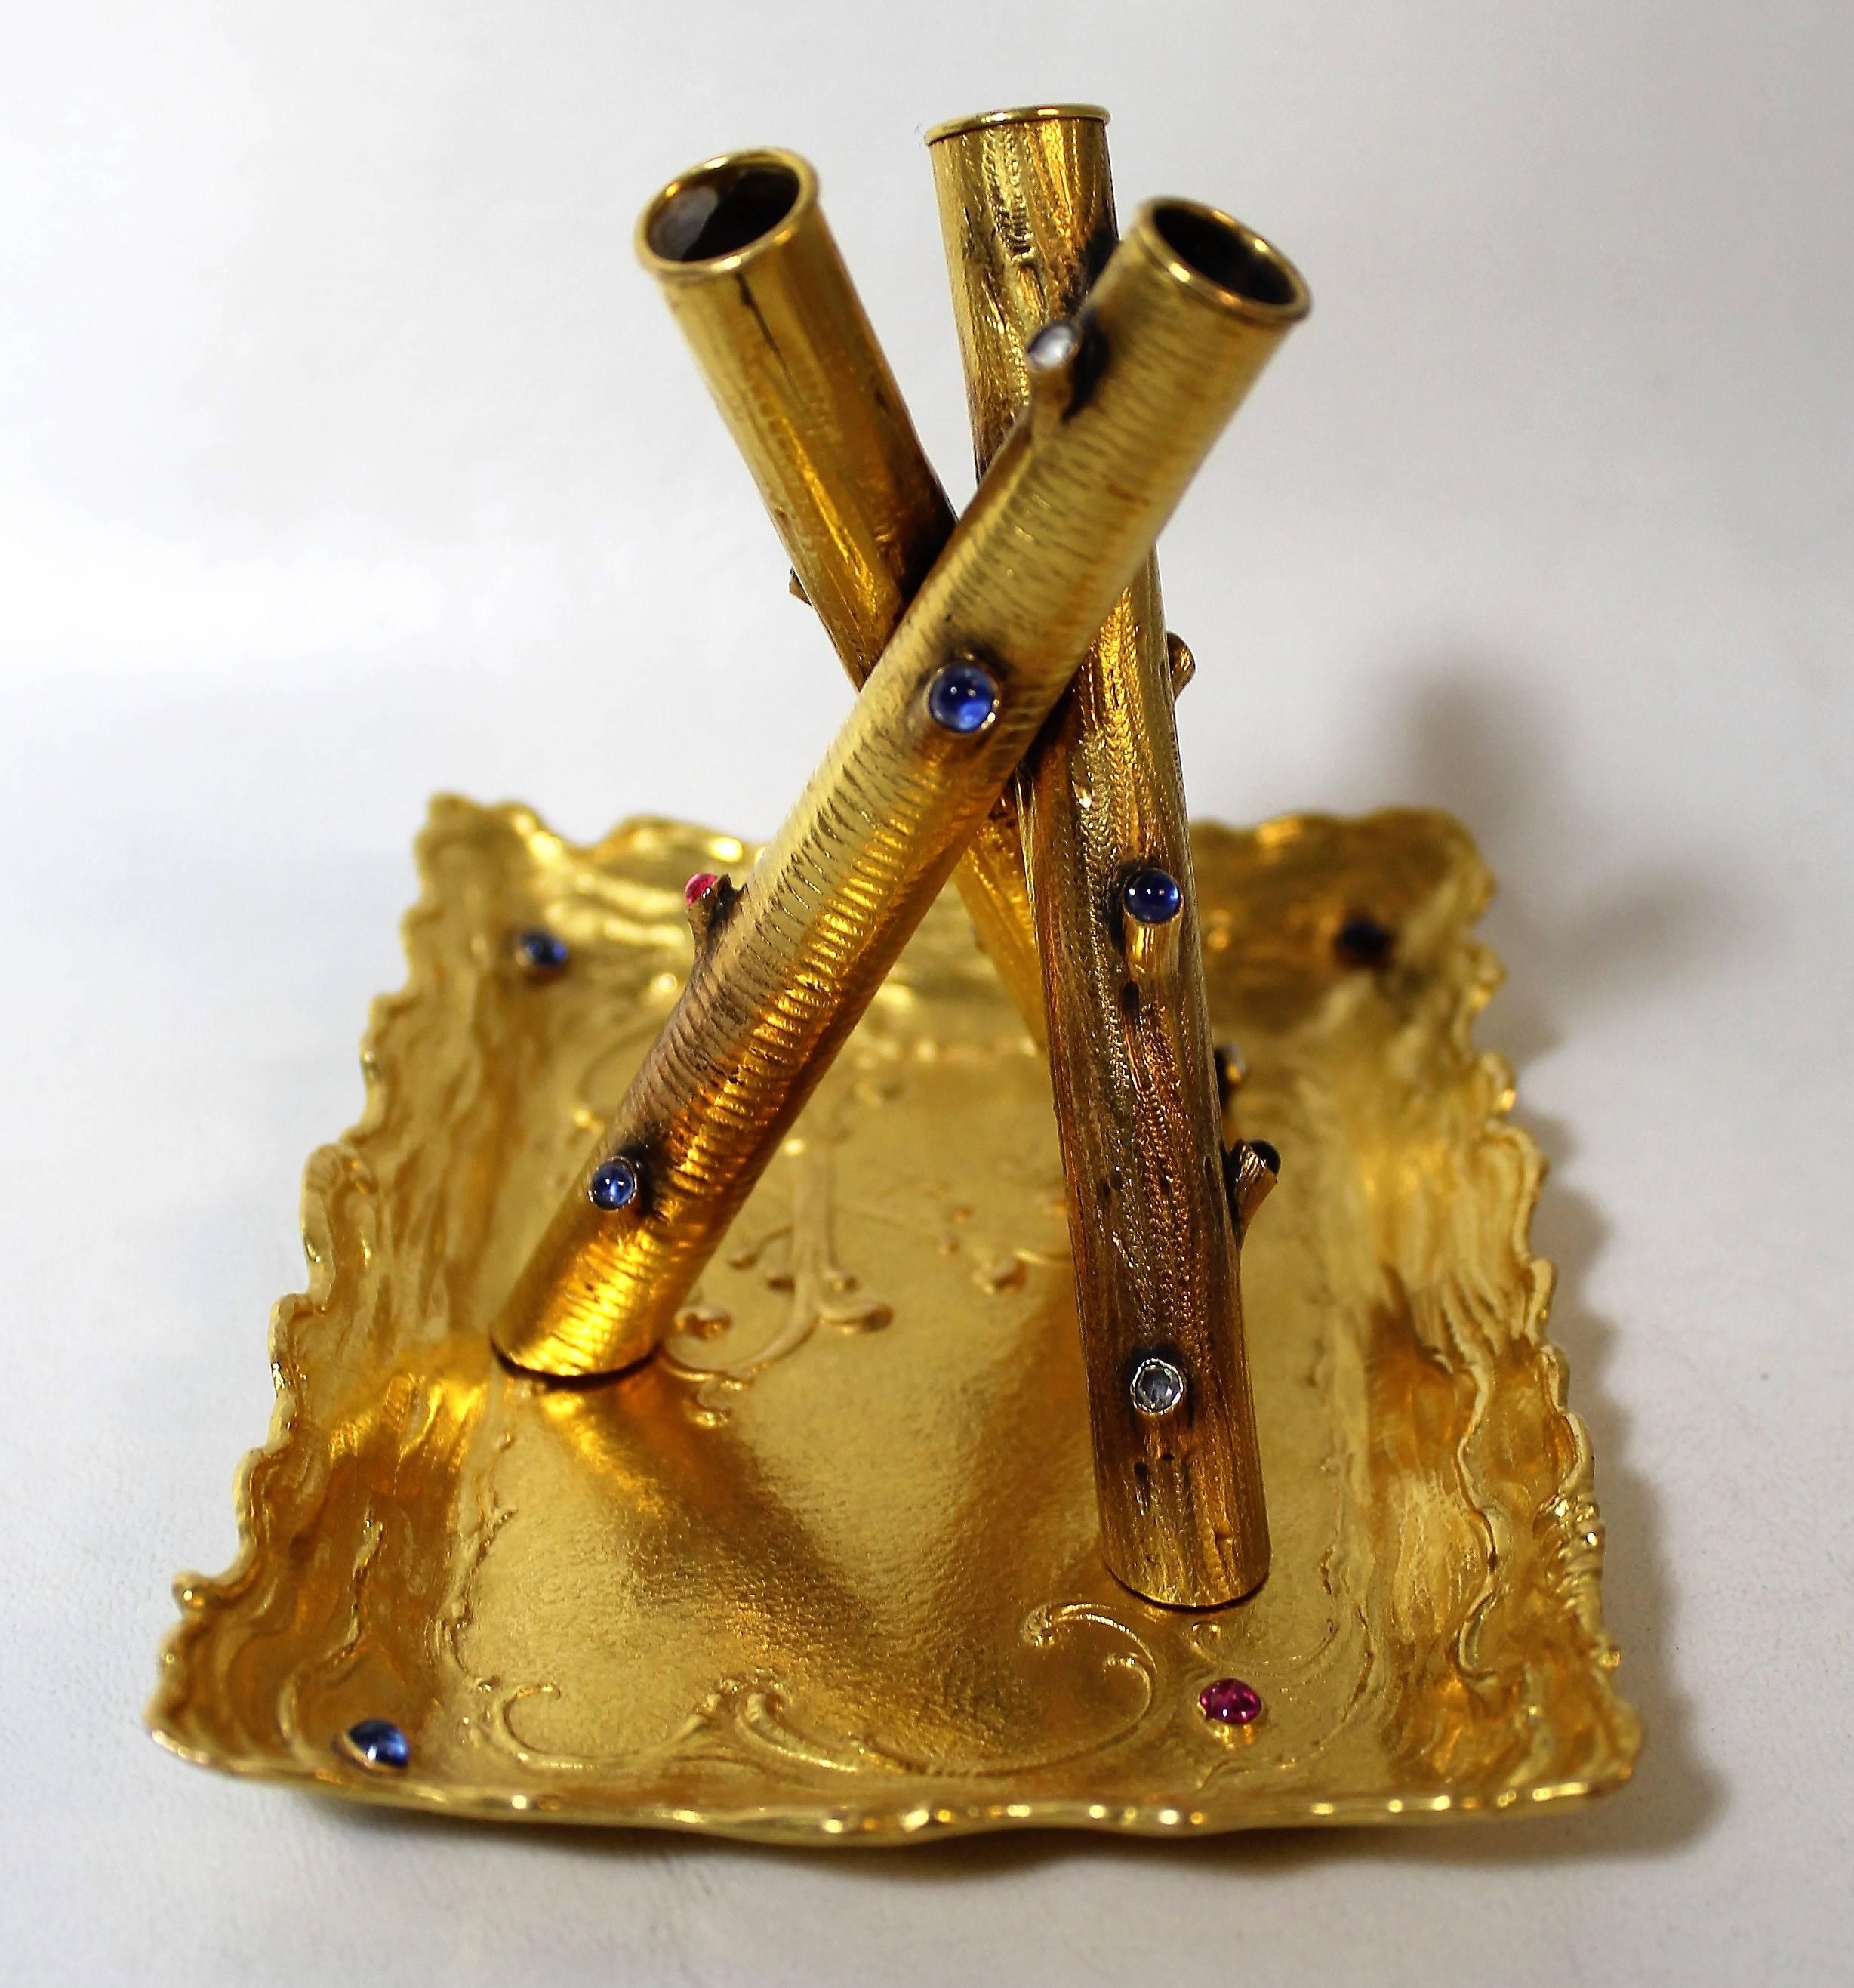 Magnificent 14-karat gold pen holder and tray with diamonds, rubies and sapphires.
Pen holder
Handmade tubular pen holder in fourteen karat yellow gold with a tripod design. It is set with four rose cut diamonds of 2.6 m.m. in diameter. It is also